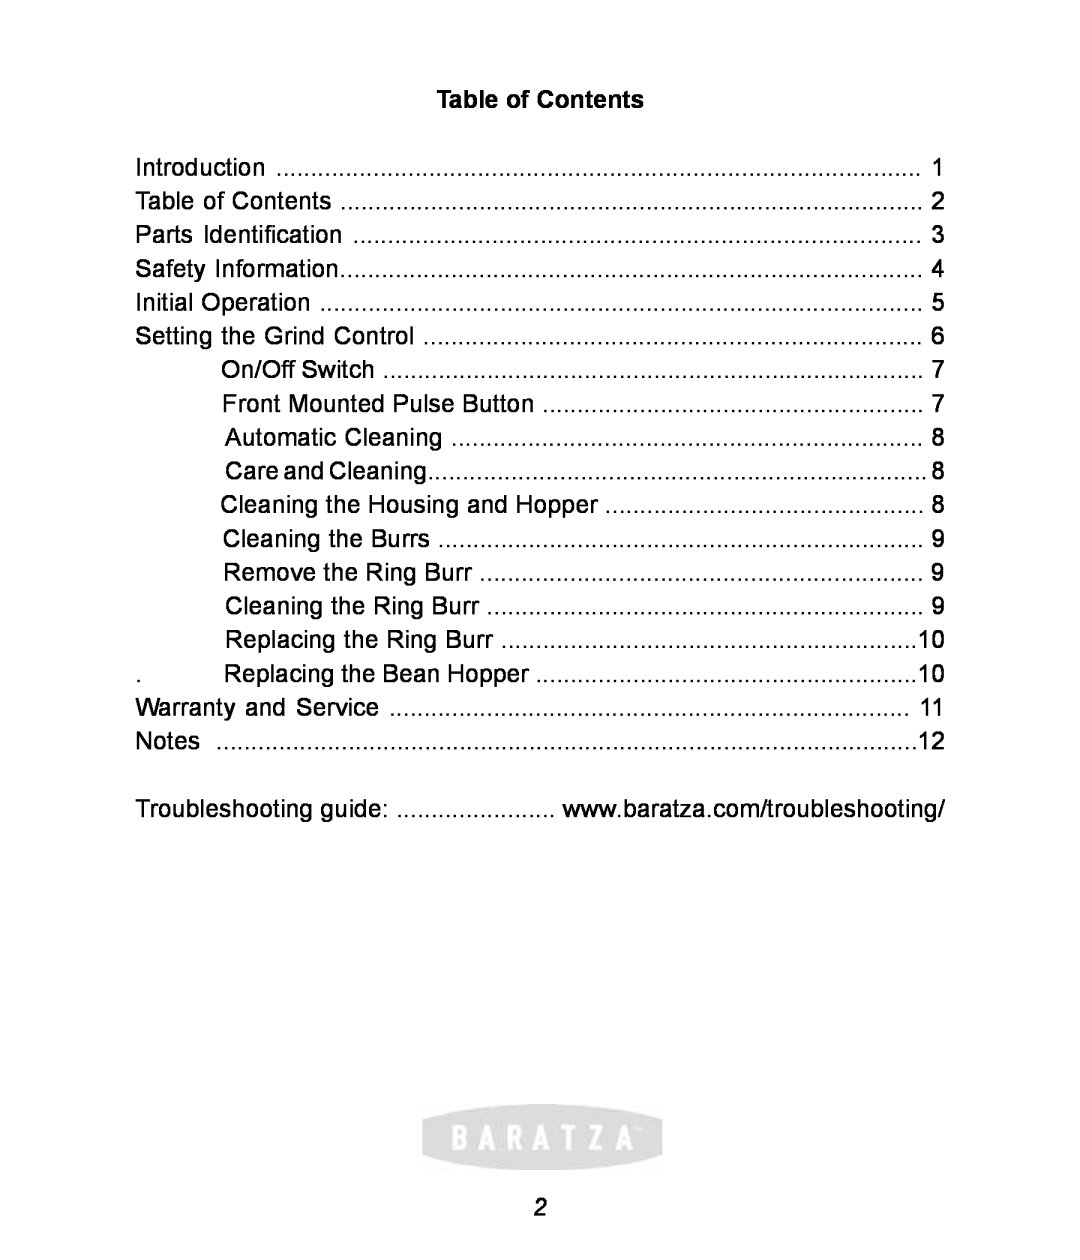 Baratza G385 manual Table of Contents, Troubleshooting guide 